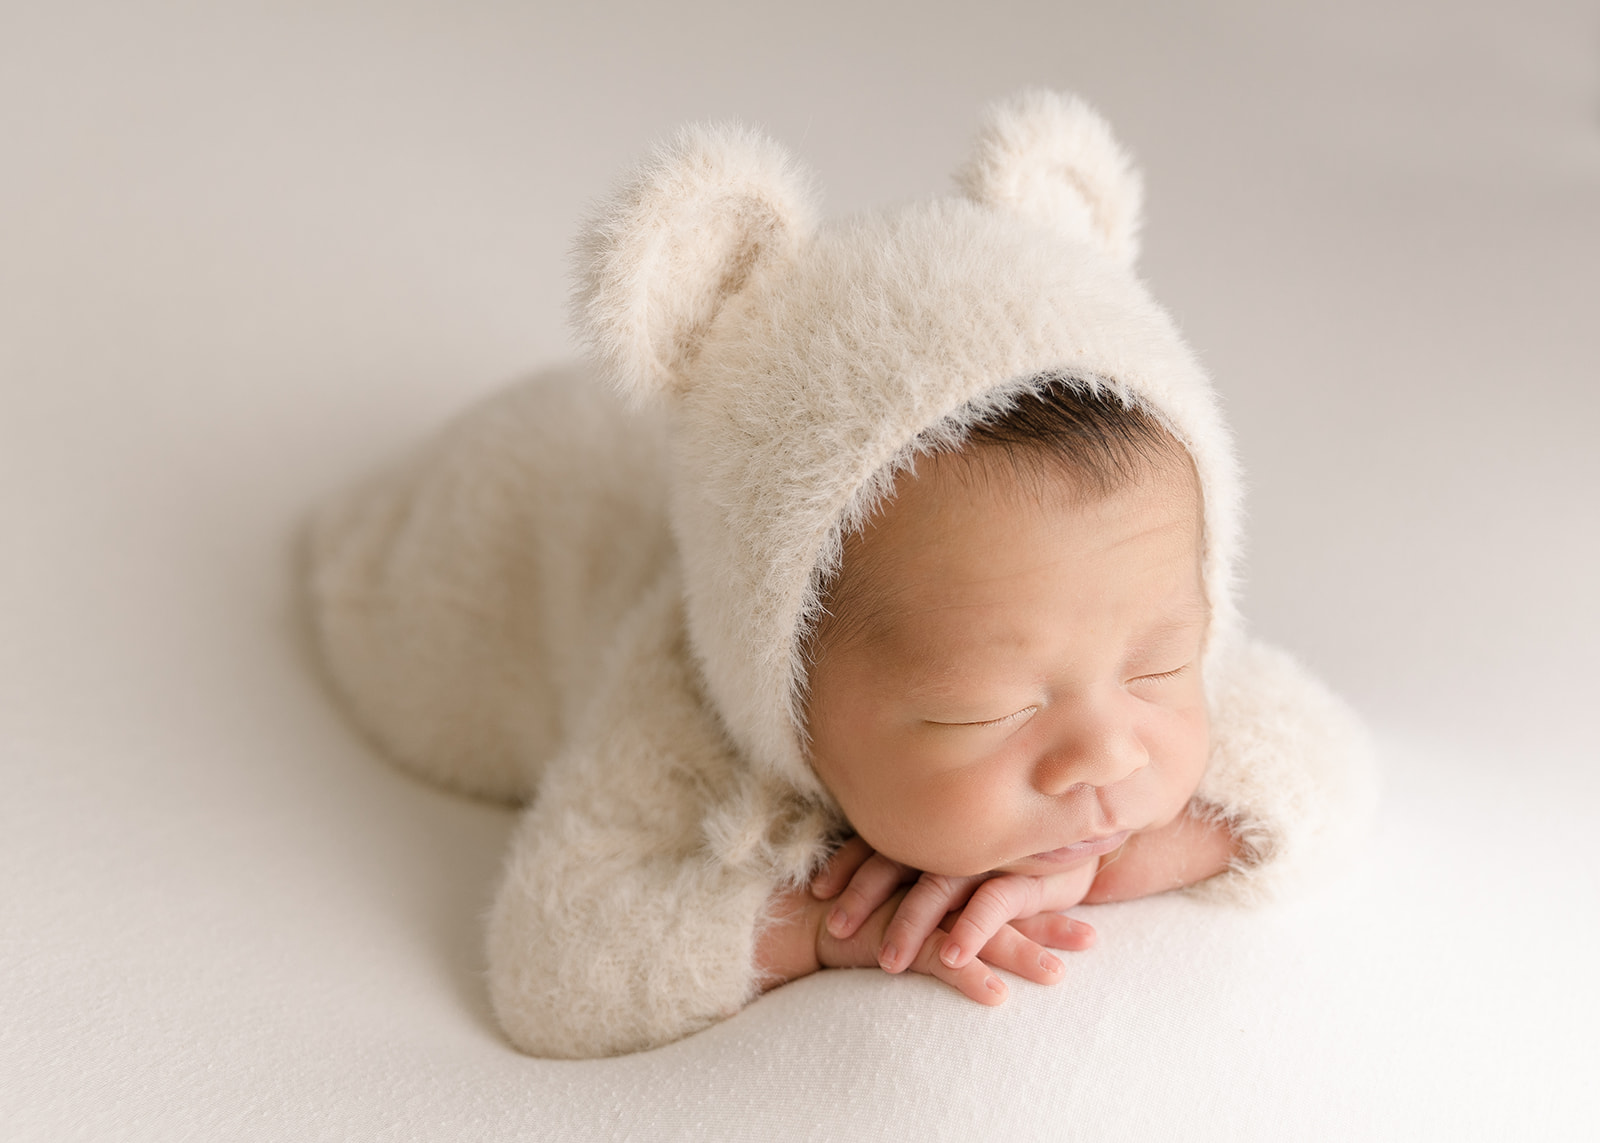 A newborn baby sleeps in a white furry onesie and bonnet with ears Irvine Midwife